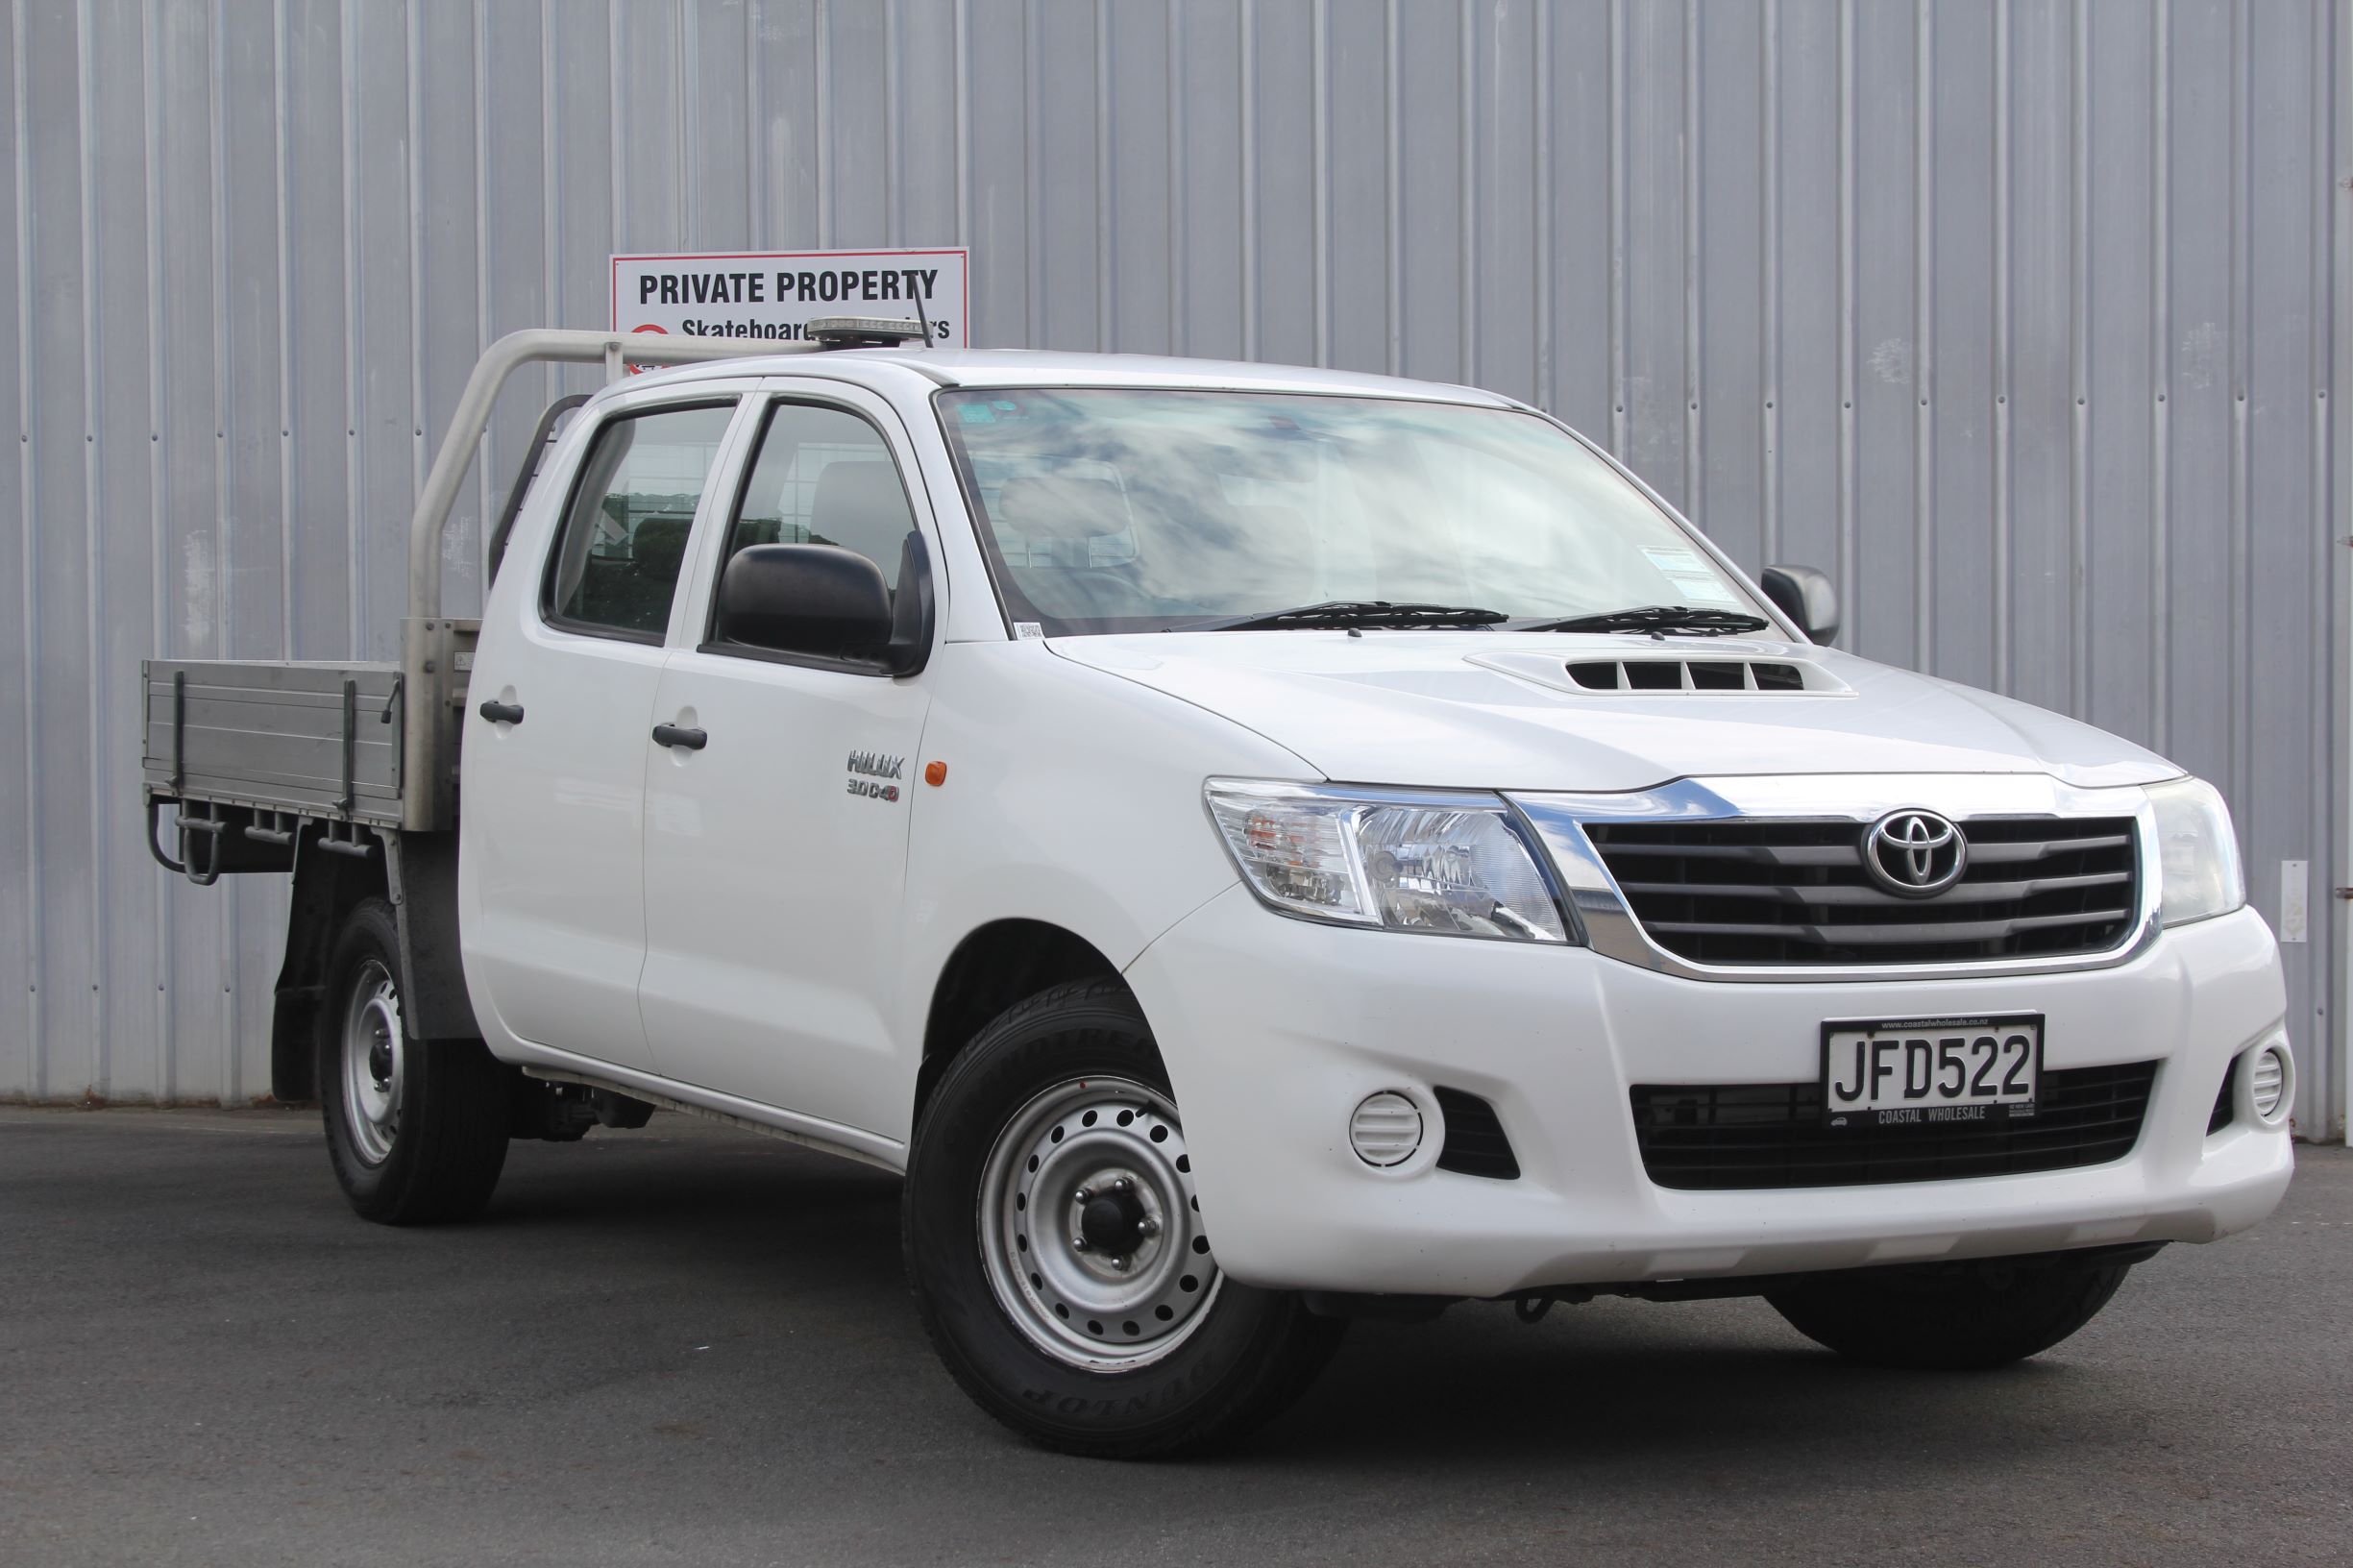 Toyota HILUX FLATDECK 2WD 2015 for sale in Auckland